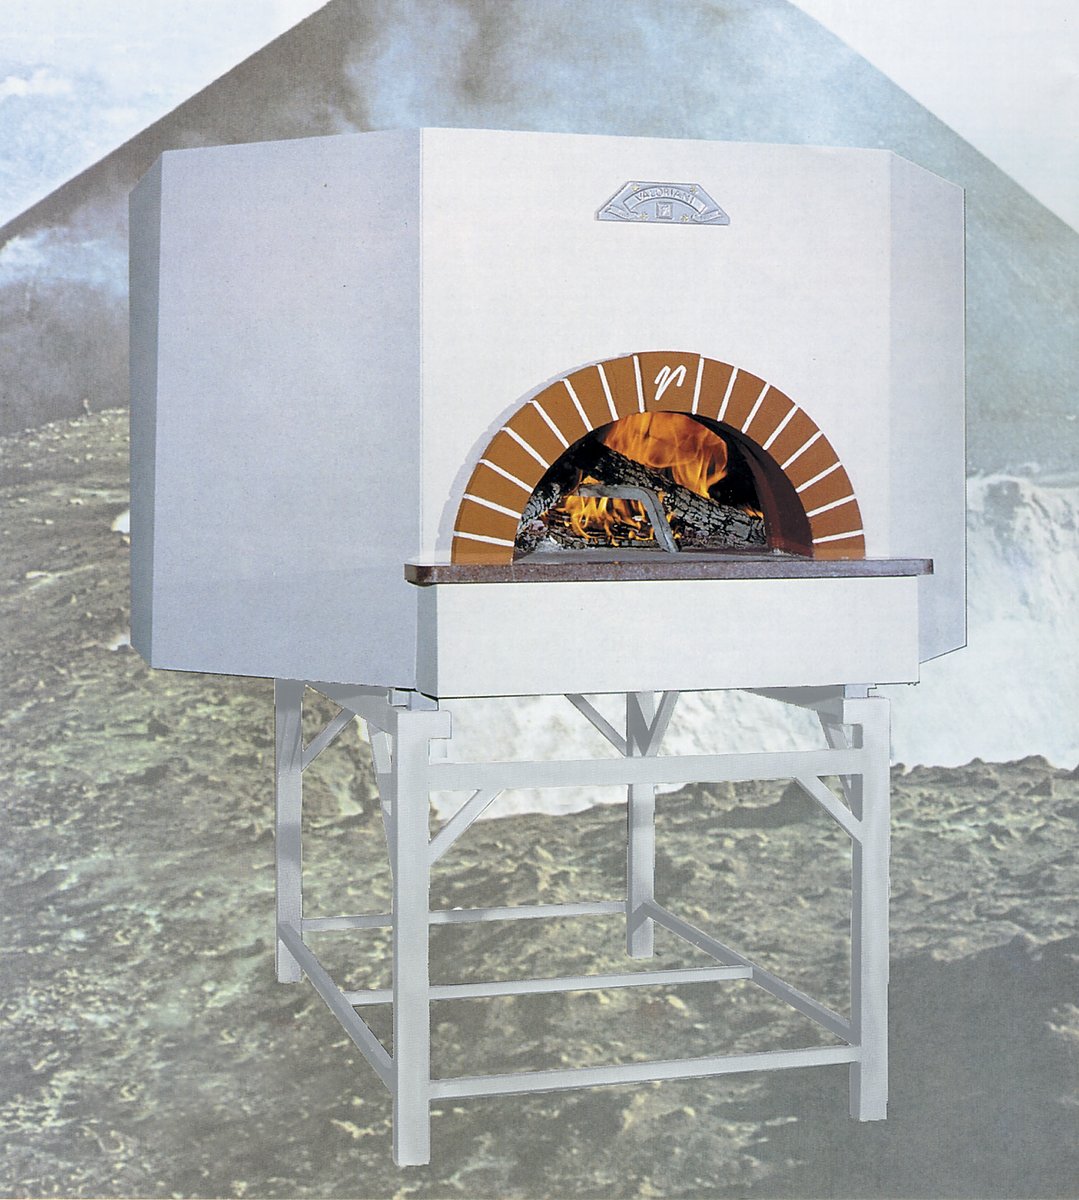 The Vesuvio OT wood fired pizza oven for restaurant and commercial use